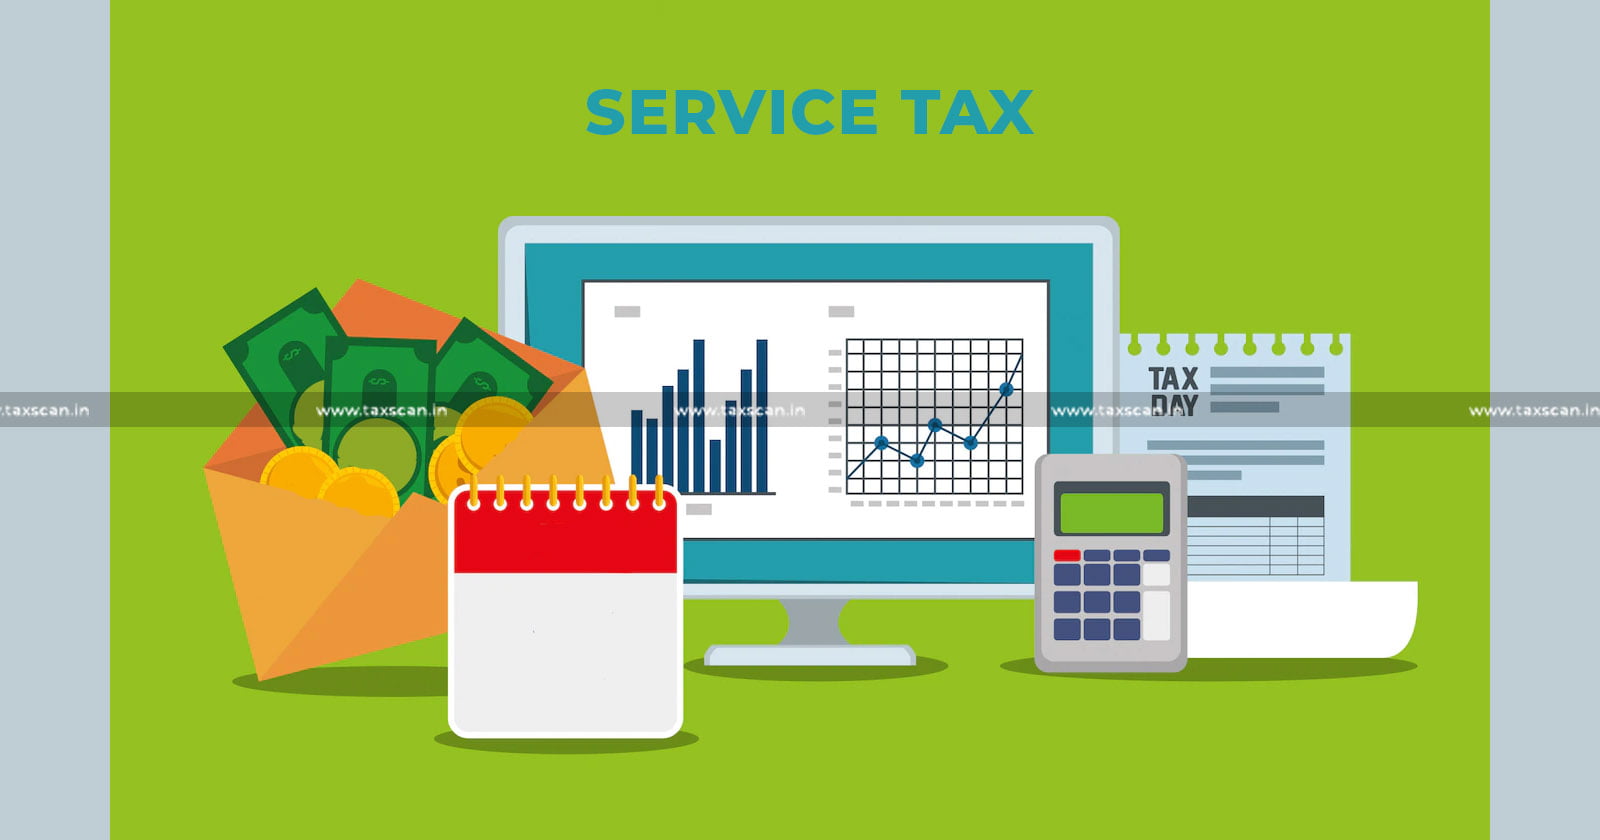 CESTAT - confirms - Service Tax - Demand - Refund - Claim - One Year - Date of Payment - Service Tax - taxscan